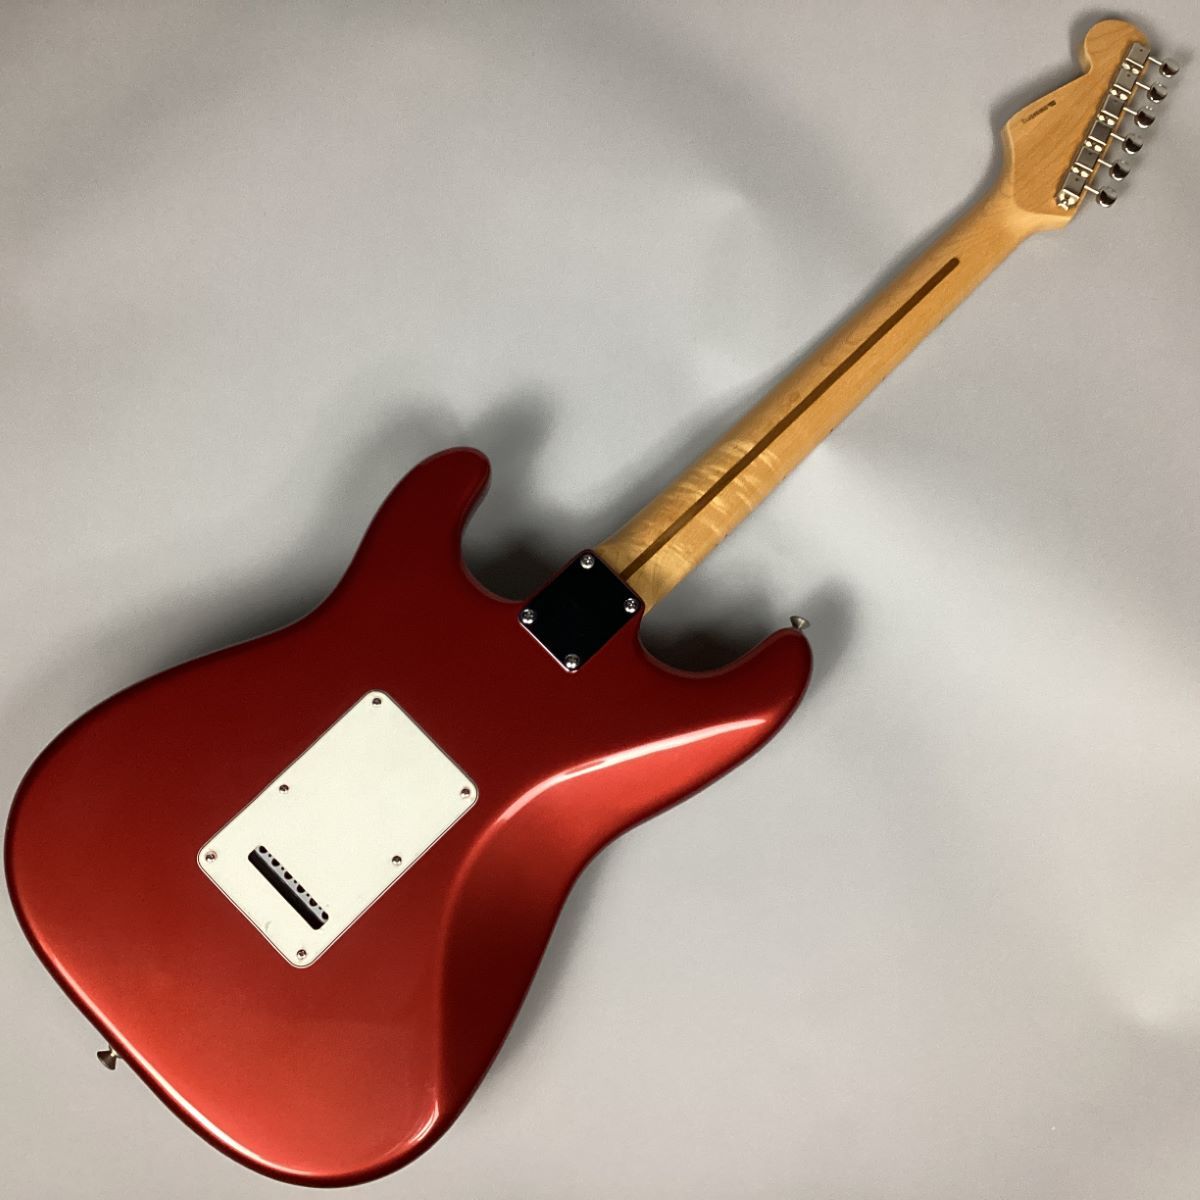 Fender（フェンダー）/Yngwie Malmsteen Stratocaster Scalloped Maple Fingerboard【1997年製】 【USED】エレクトリックギターSTタイプ【新所沢パルコ店】